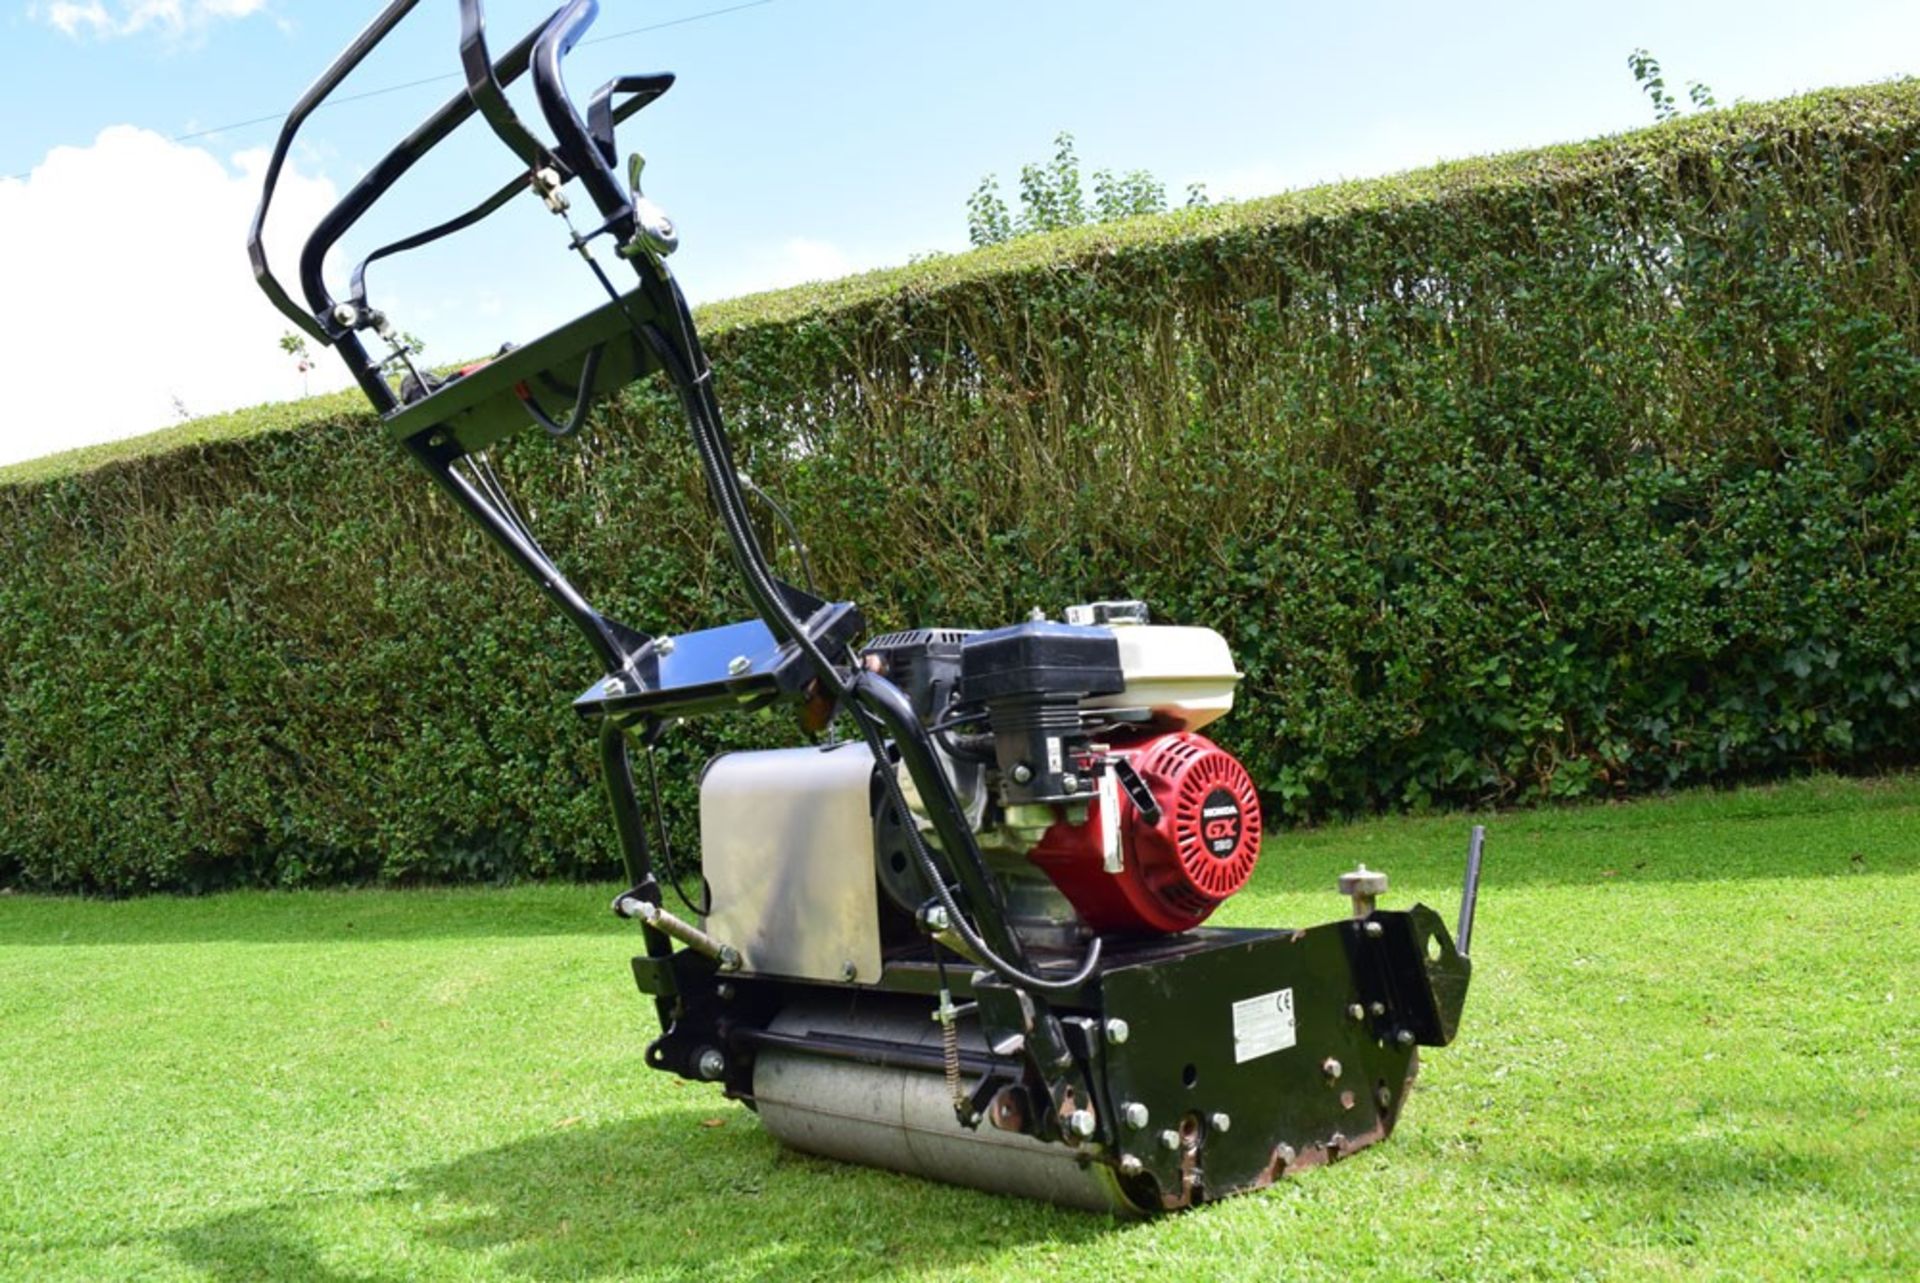 2012 Allett Shaver 20, 10 Blade Cylinder Mower With Grass Box - Image 7 of 9